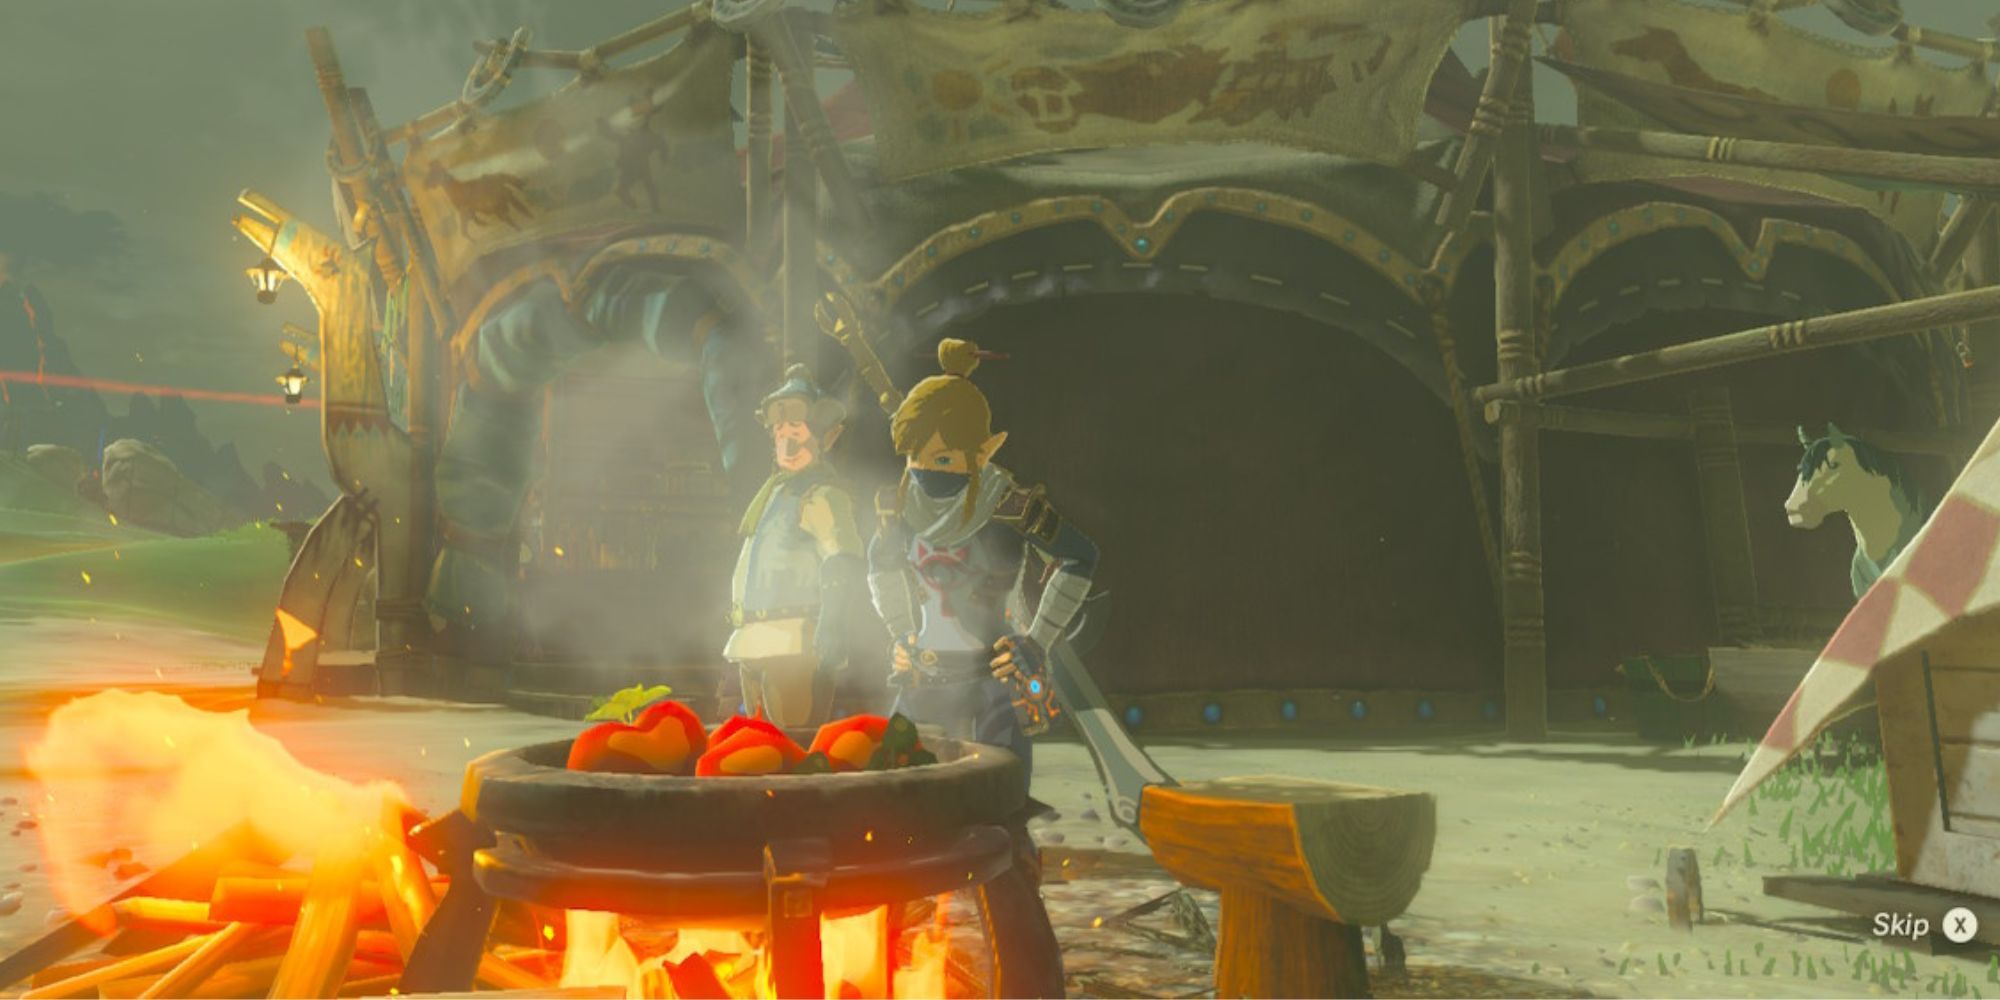 Link cooks Hearty Fried Wild Greens outside a stable on a windy day